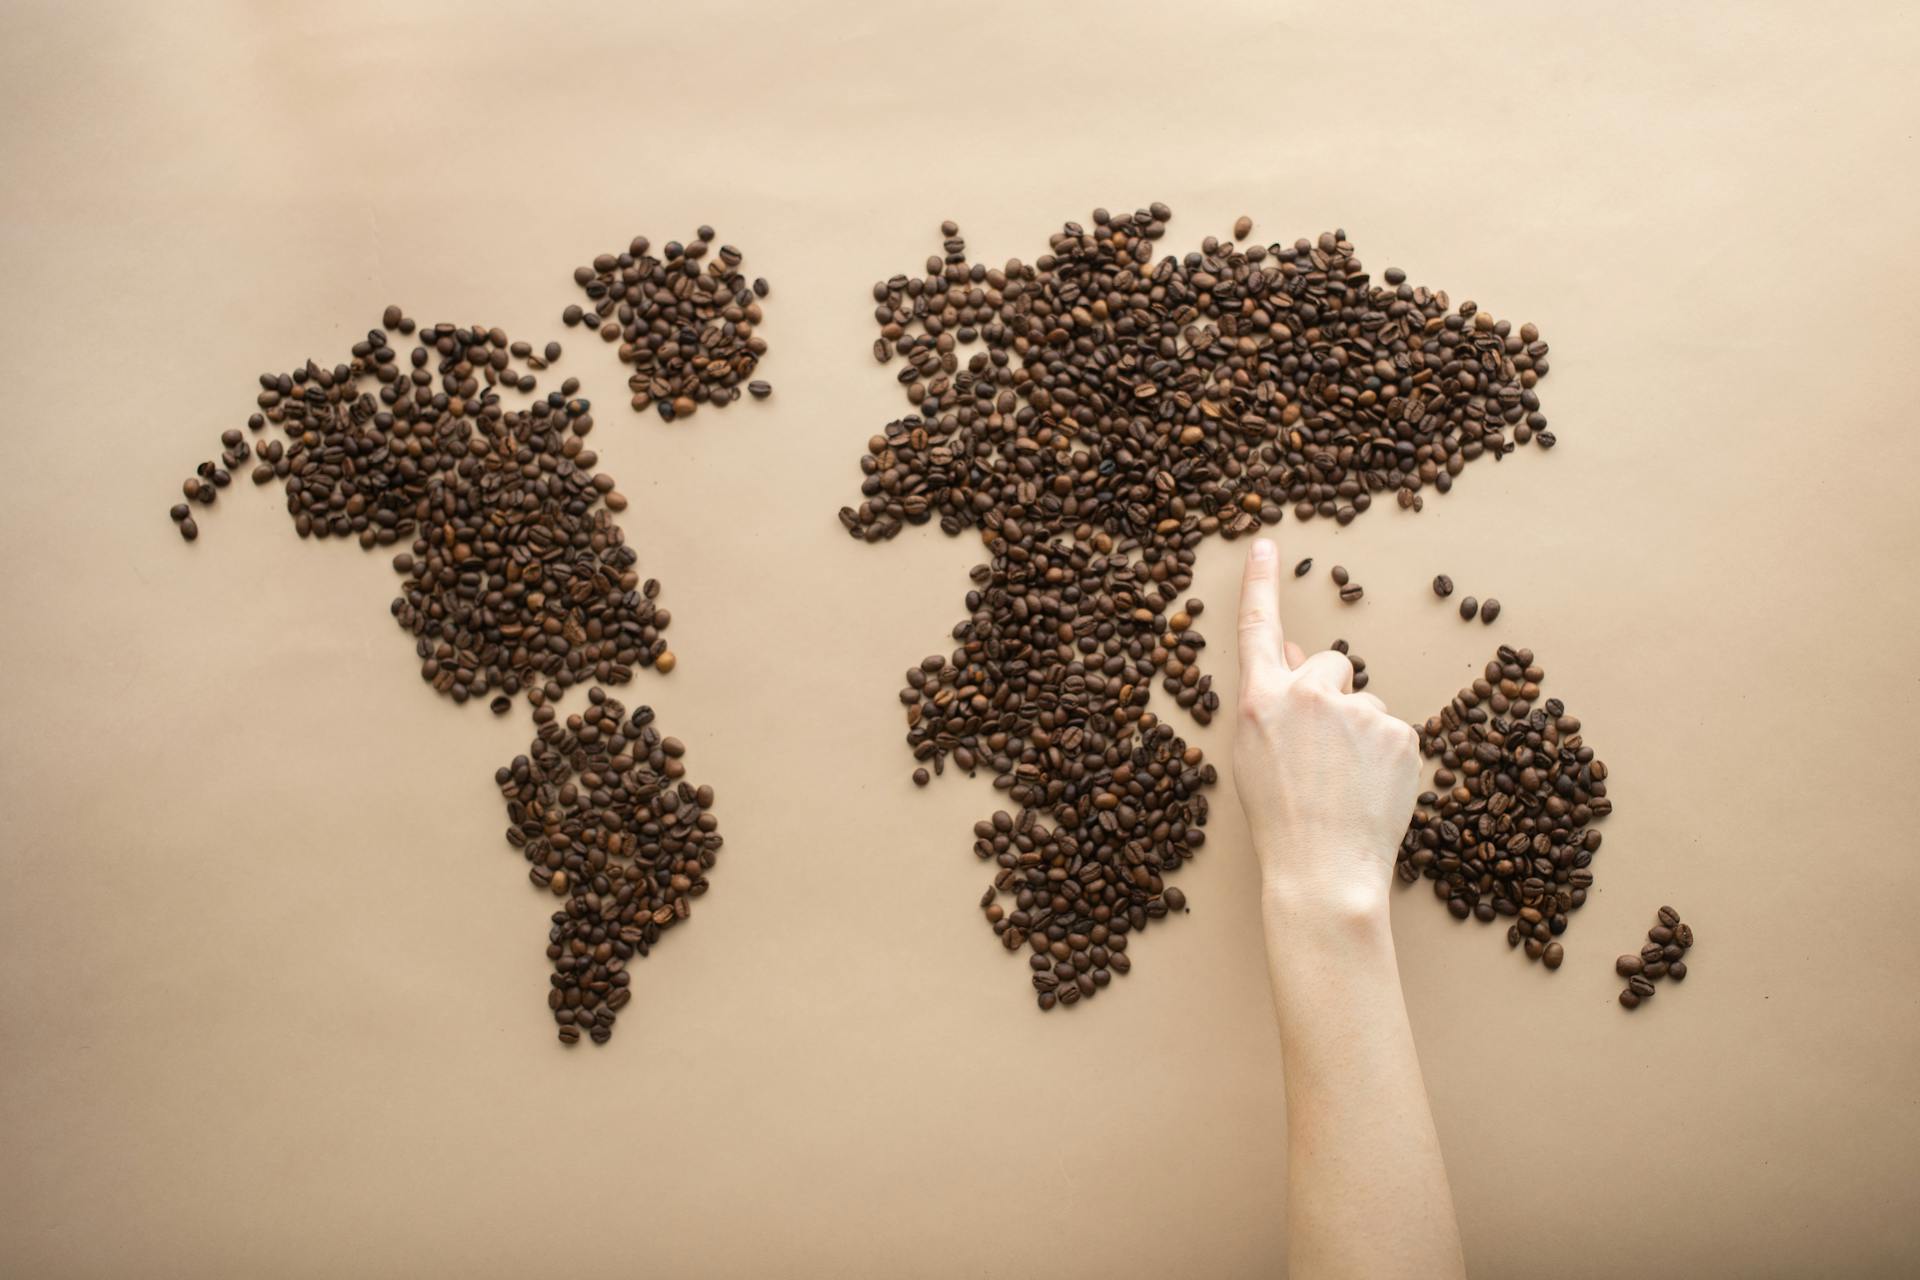 Top view of crop person pointing finger at world map made of coffee beans on brown background